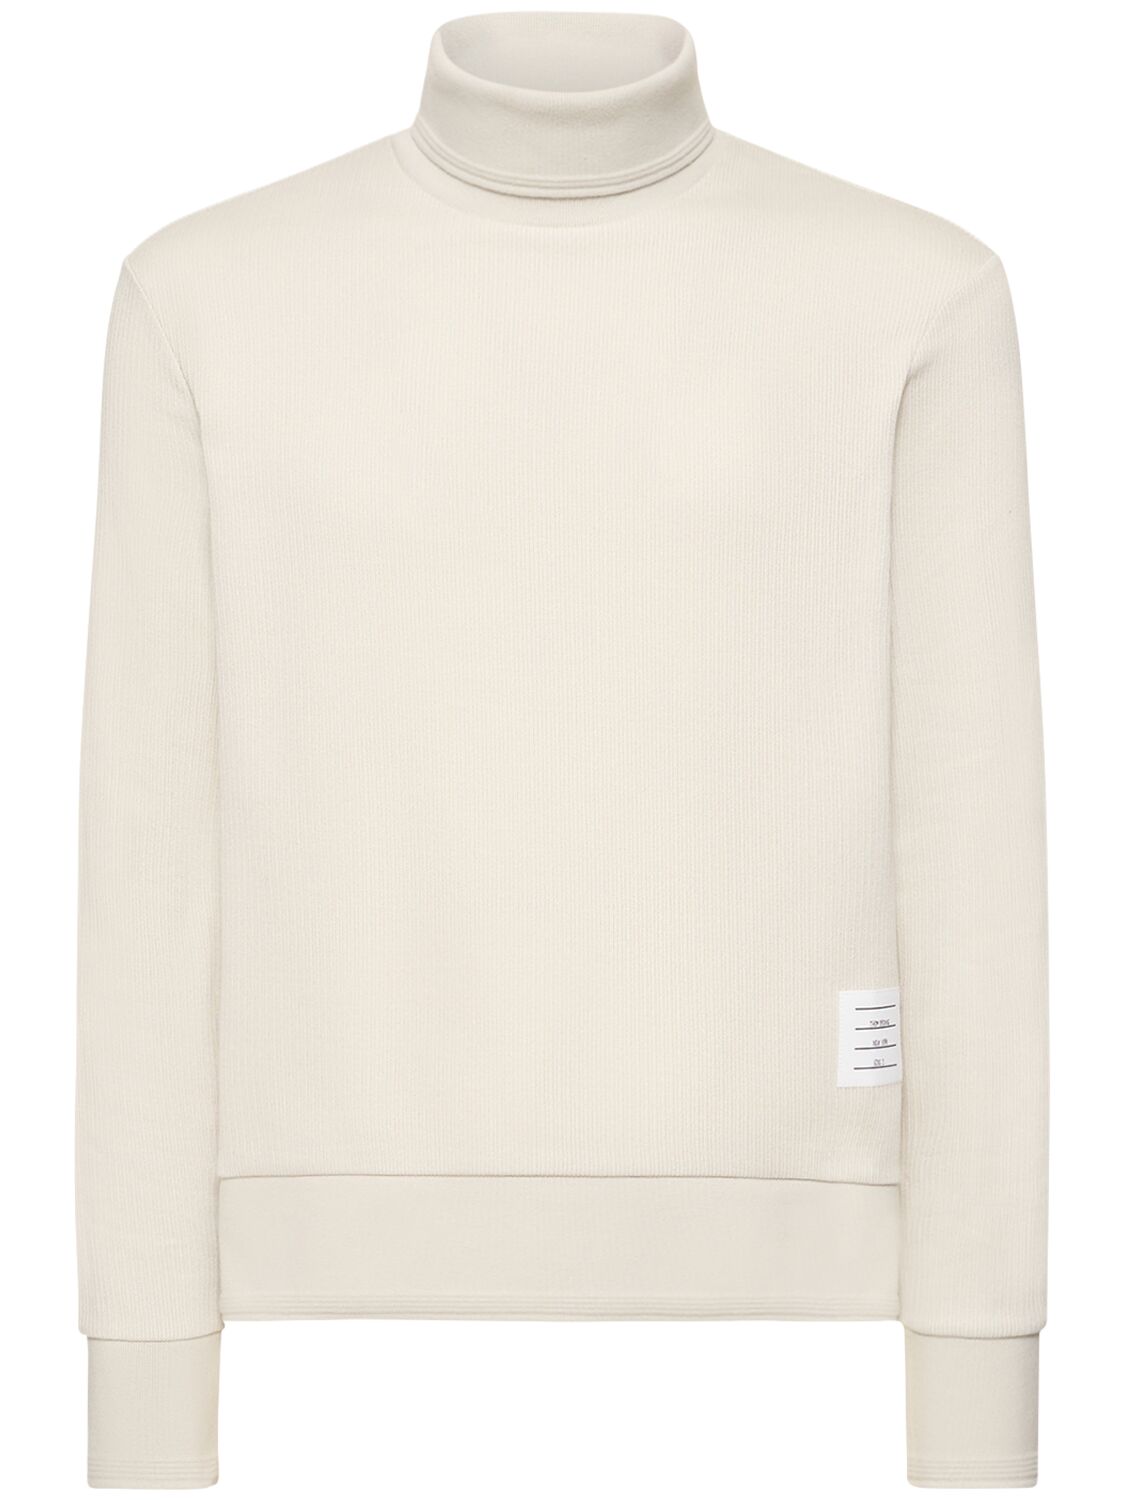 Thom Browne Cotton Knit Turtleneck Sweater In Natural White